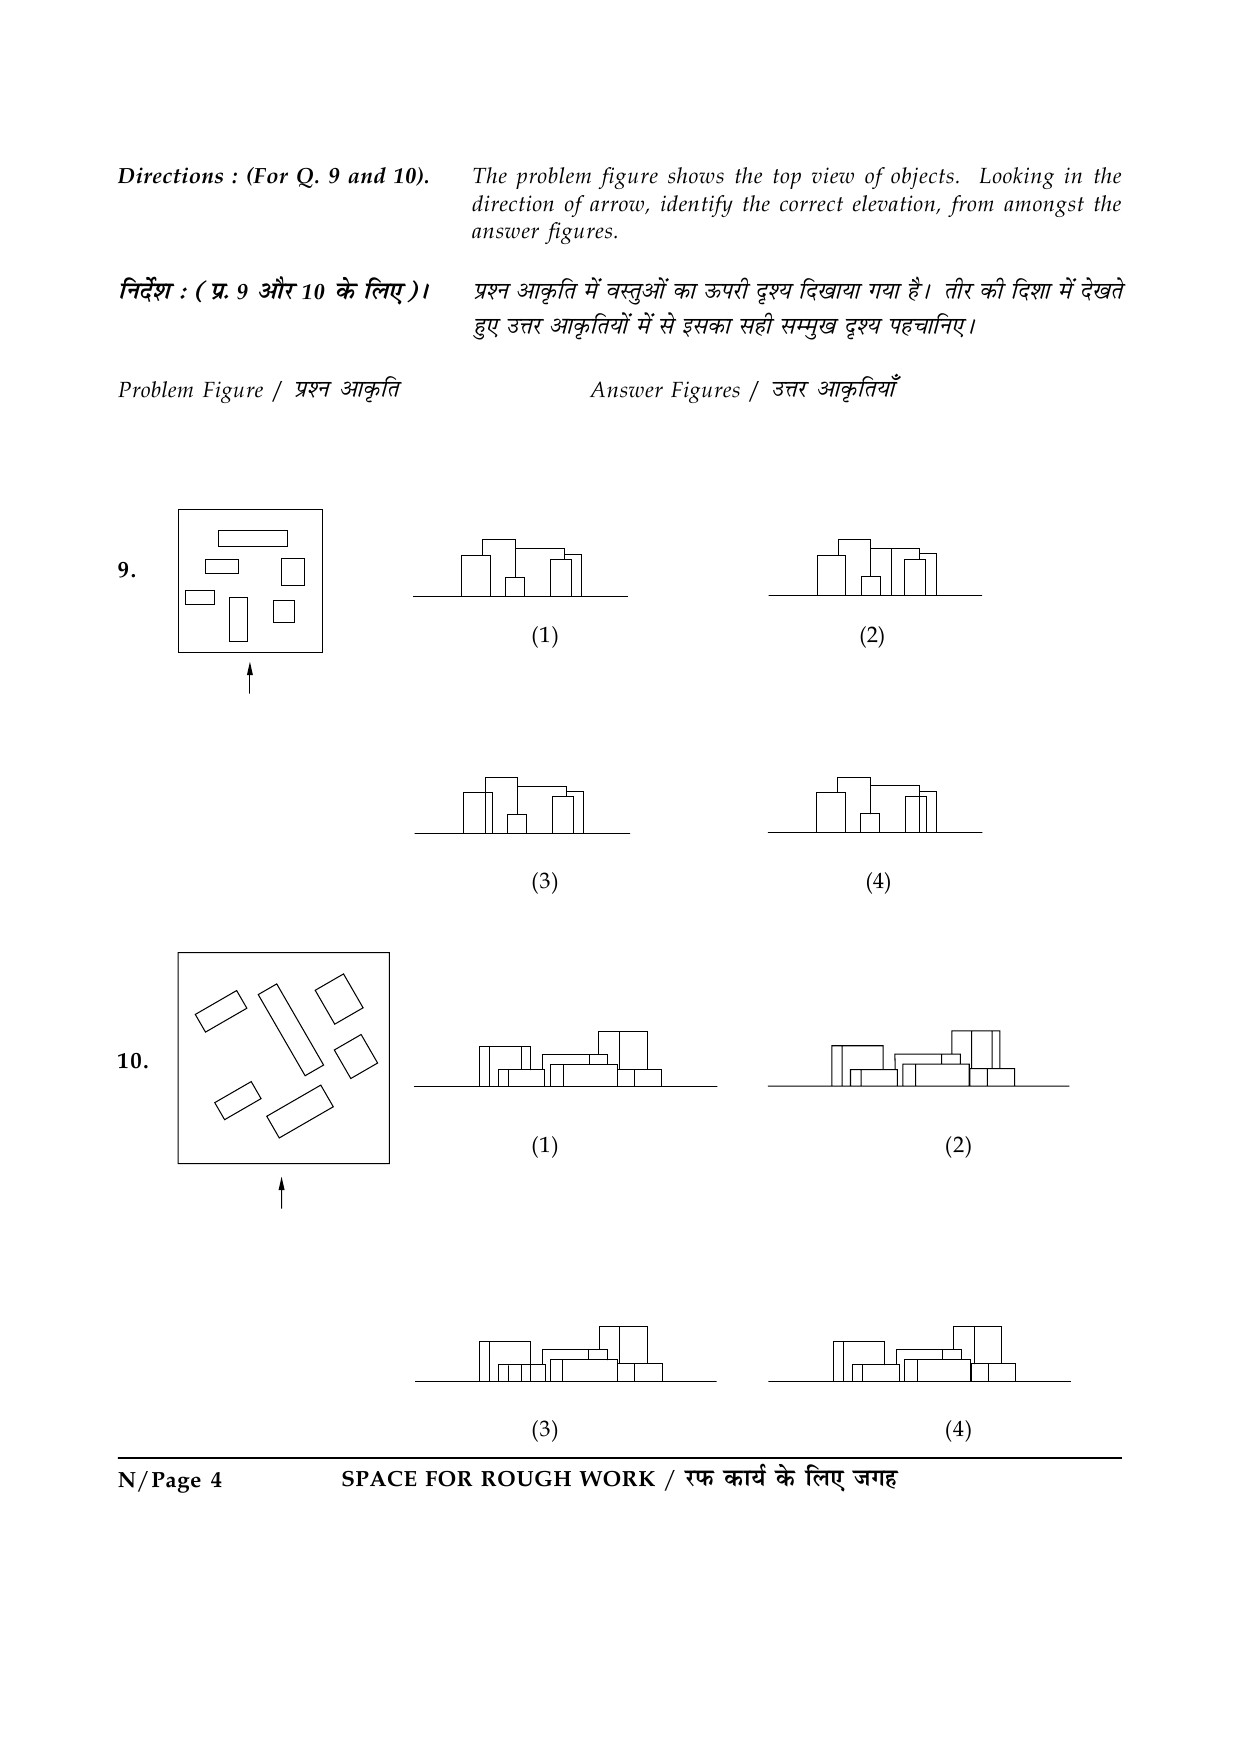 JEE Main Exam Question Paper 2015 Booklet N 4